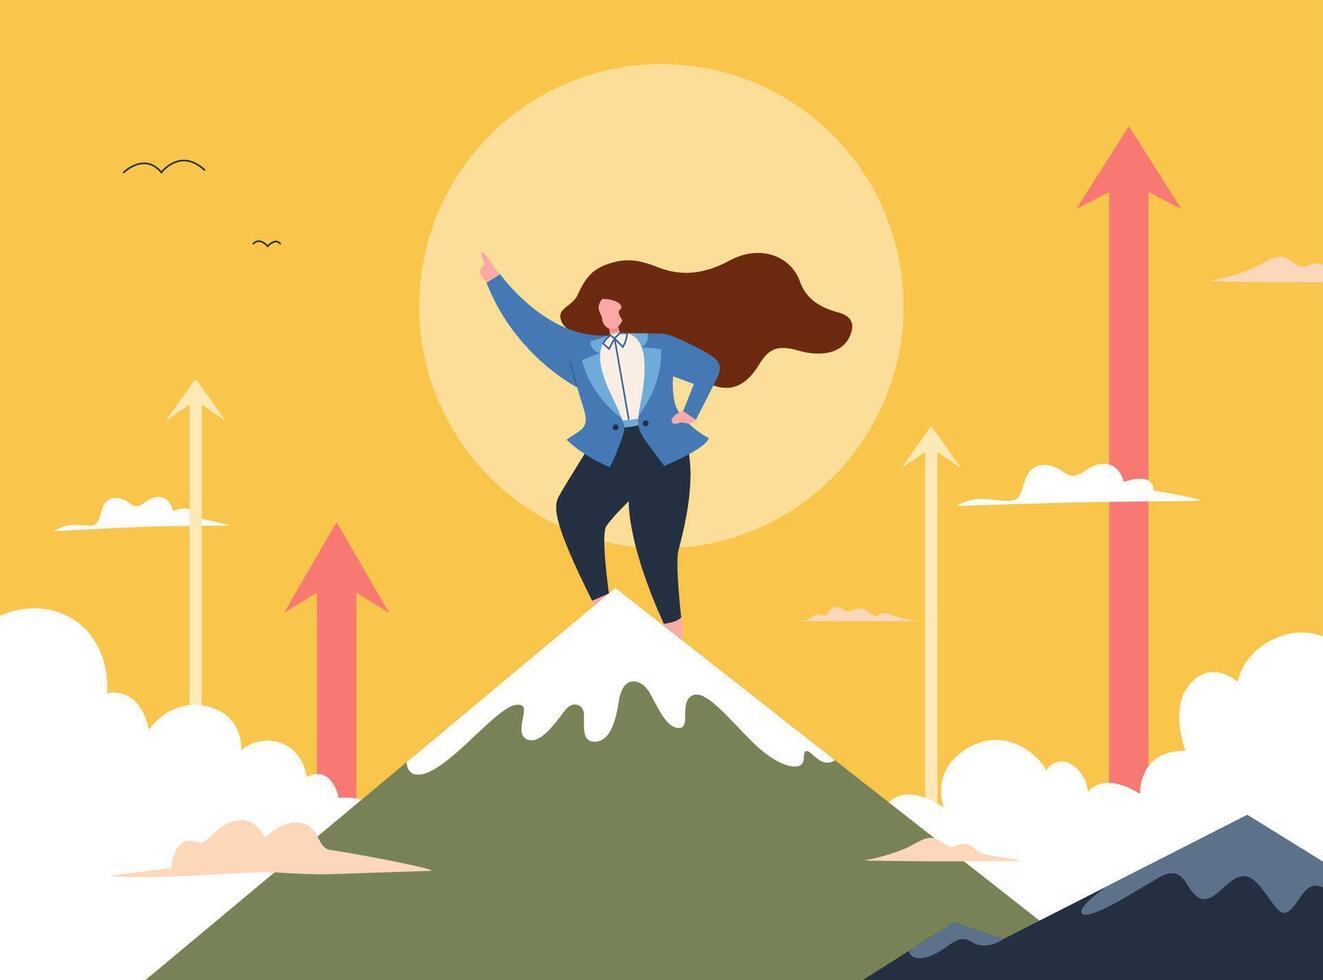 Businesswoman on the career peak. Flat style illustration of woman in suit standing on top of mountain with arrows going up symbolizing success in her work path vector